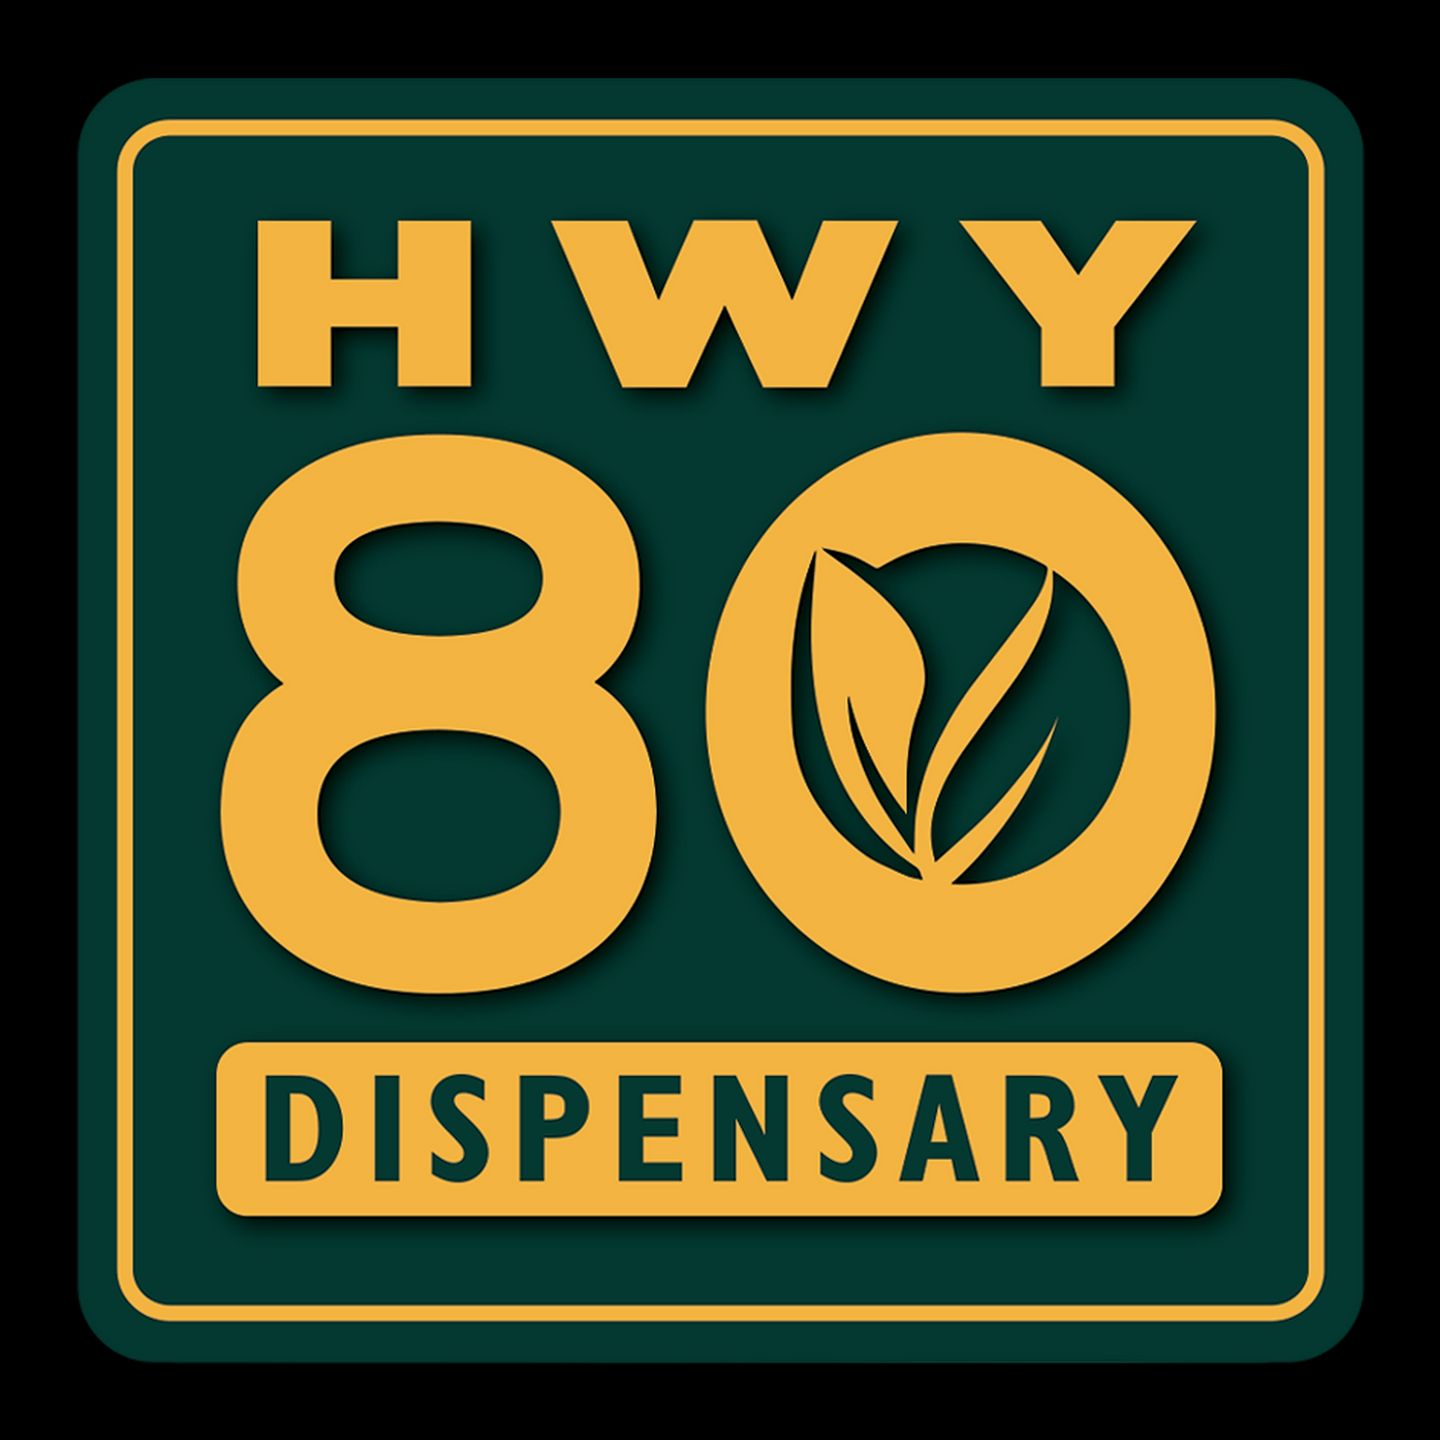 image feature Highway 80 Dispensary